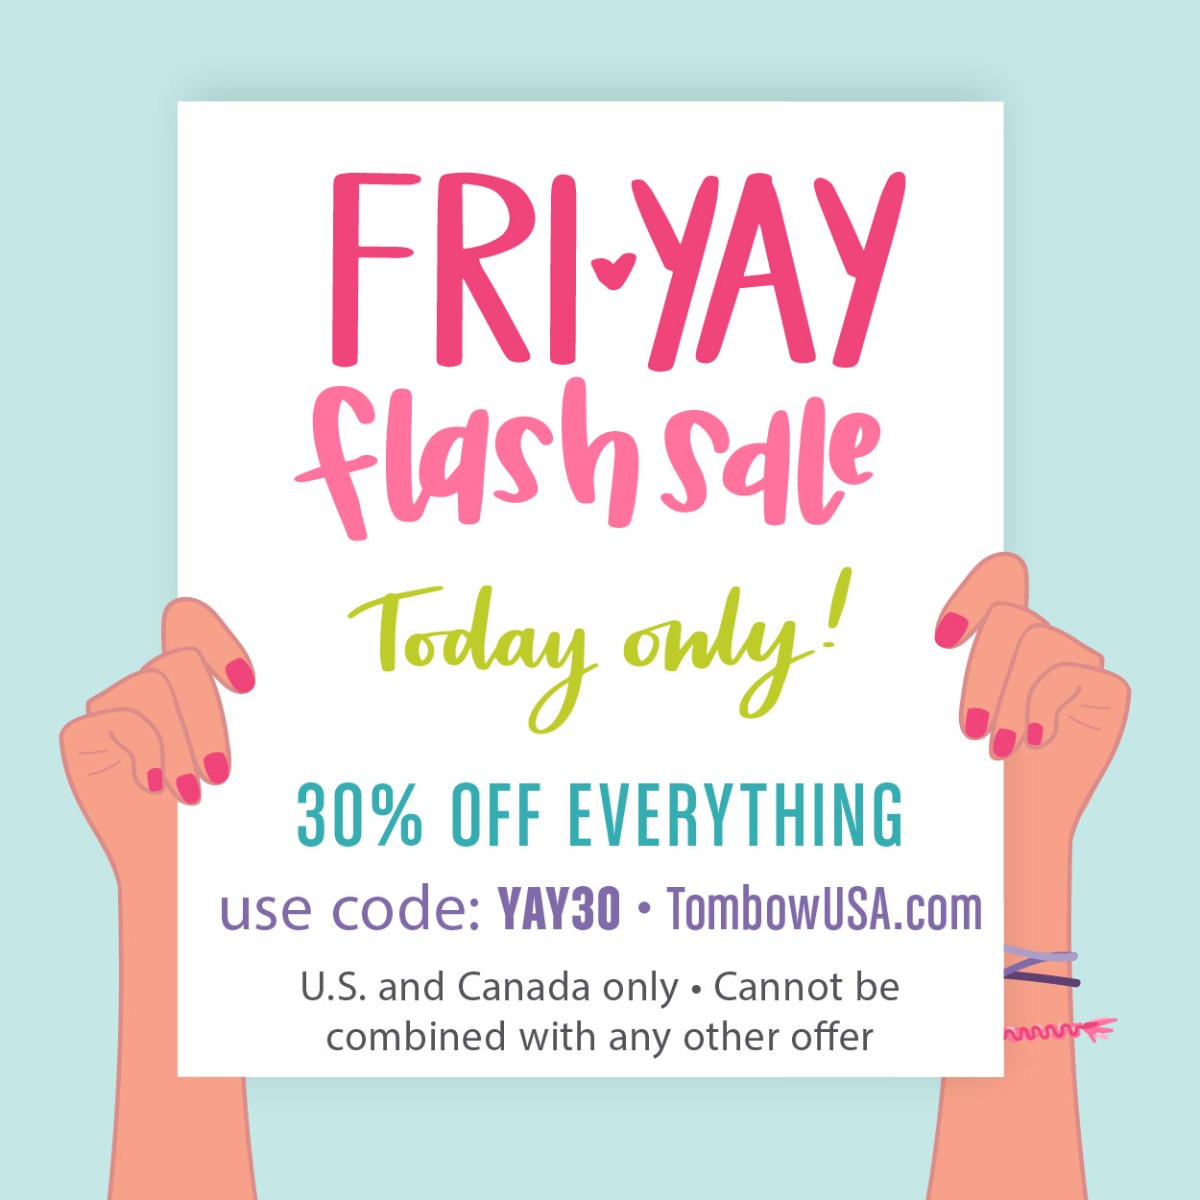 Fri-Yay Flash Sale! 30% off all Tombow products today only. Use code YAY30 today only at checkout. Cannot be combined with any other offer. United States and Canada only.